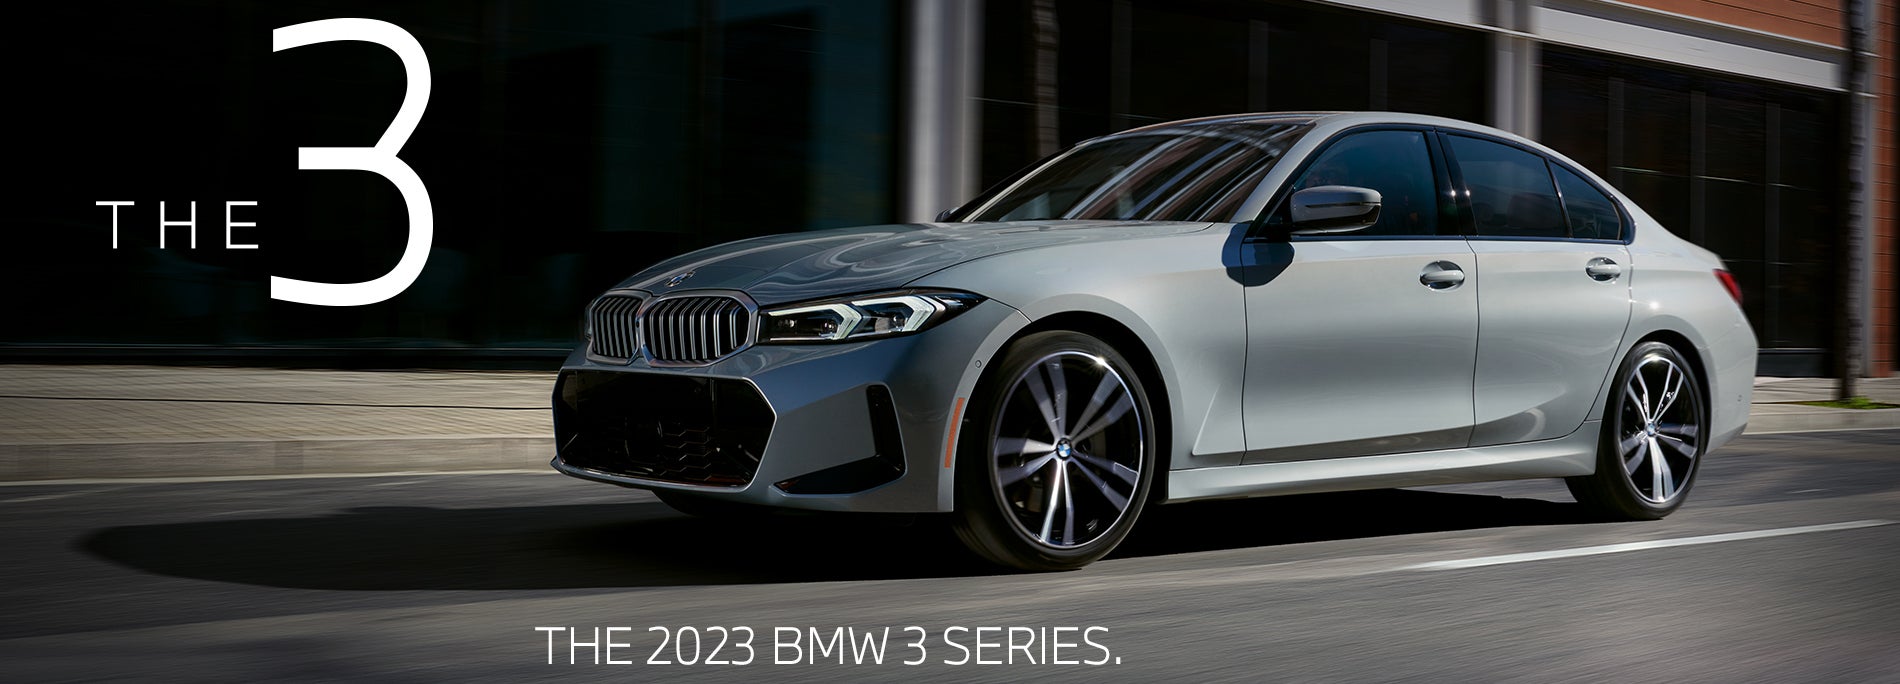 The New 2023 BMW 3 series Lease Special Newton NJ